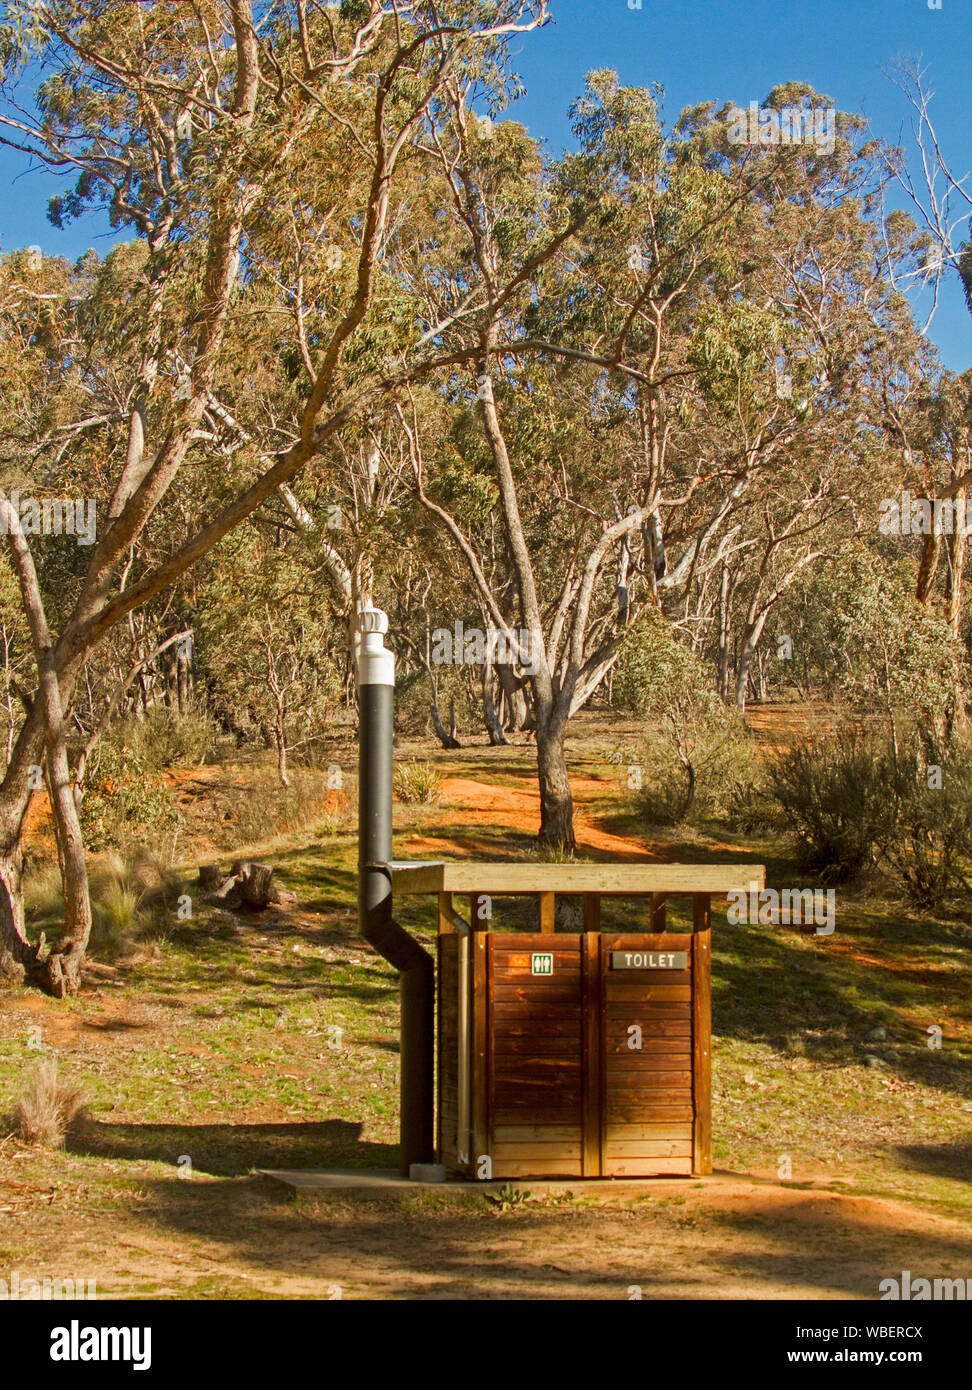 Timber building, bush toilet, dunny, pit loo, long drop toilet, among woodlands of large eucalyptus trees at rural picnic area in NSW Australia Stock Photo